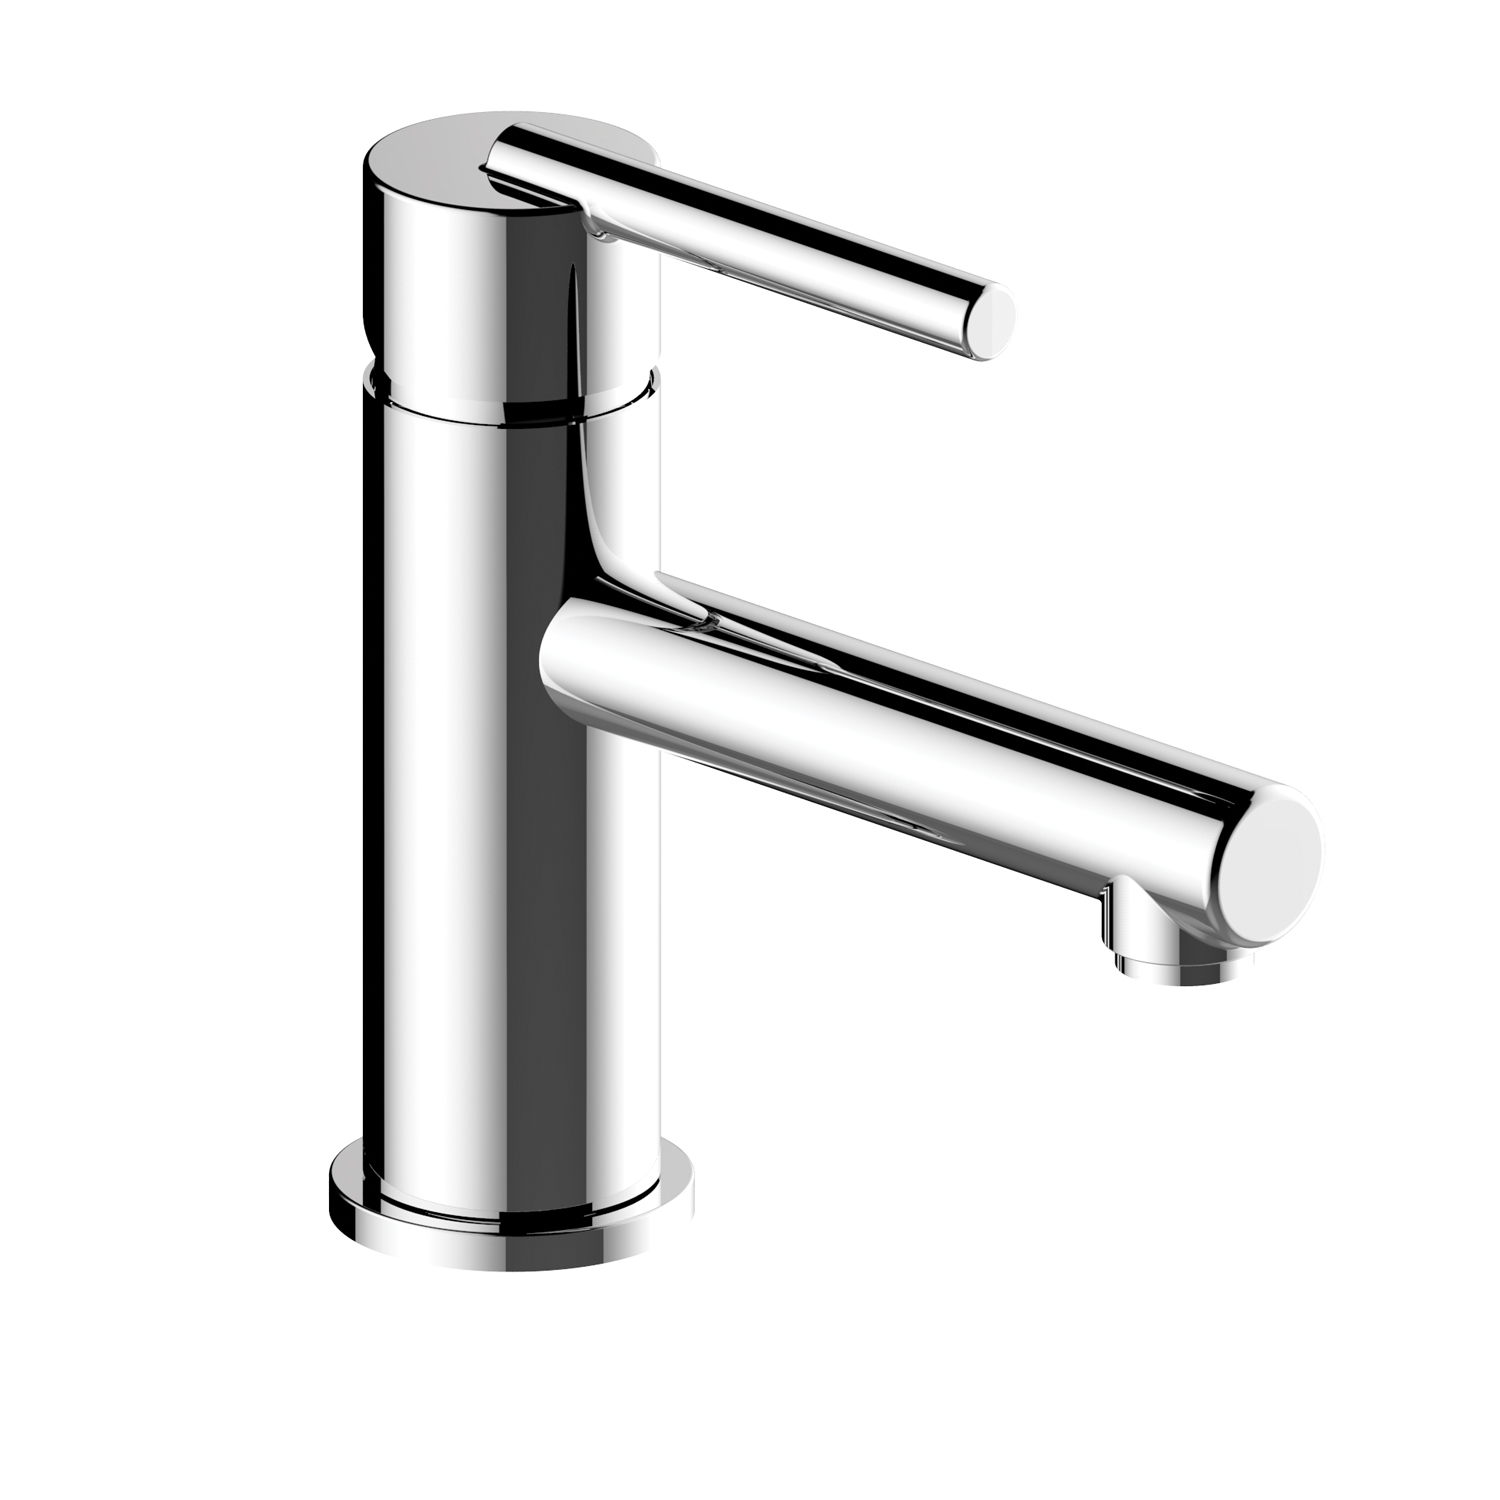 06-3331p northernlights faucet web